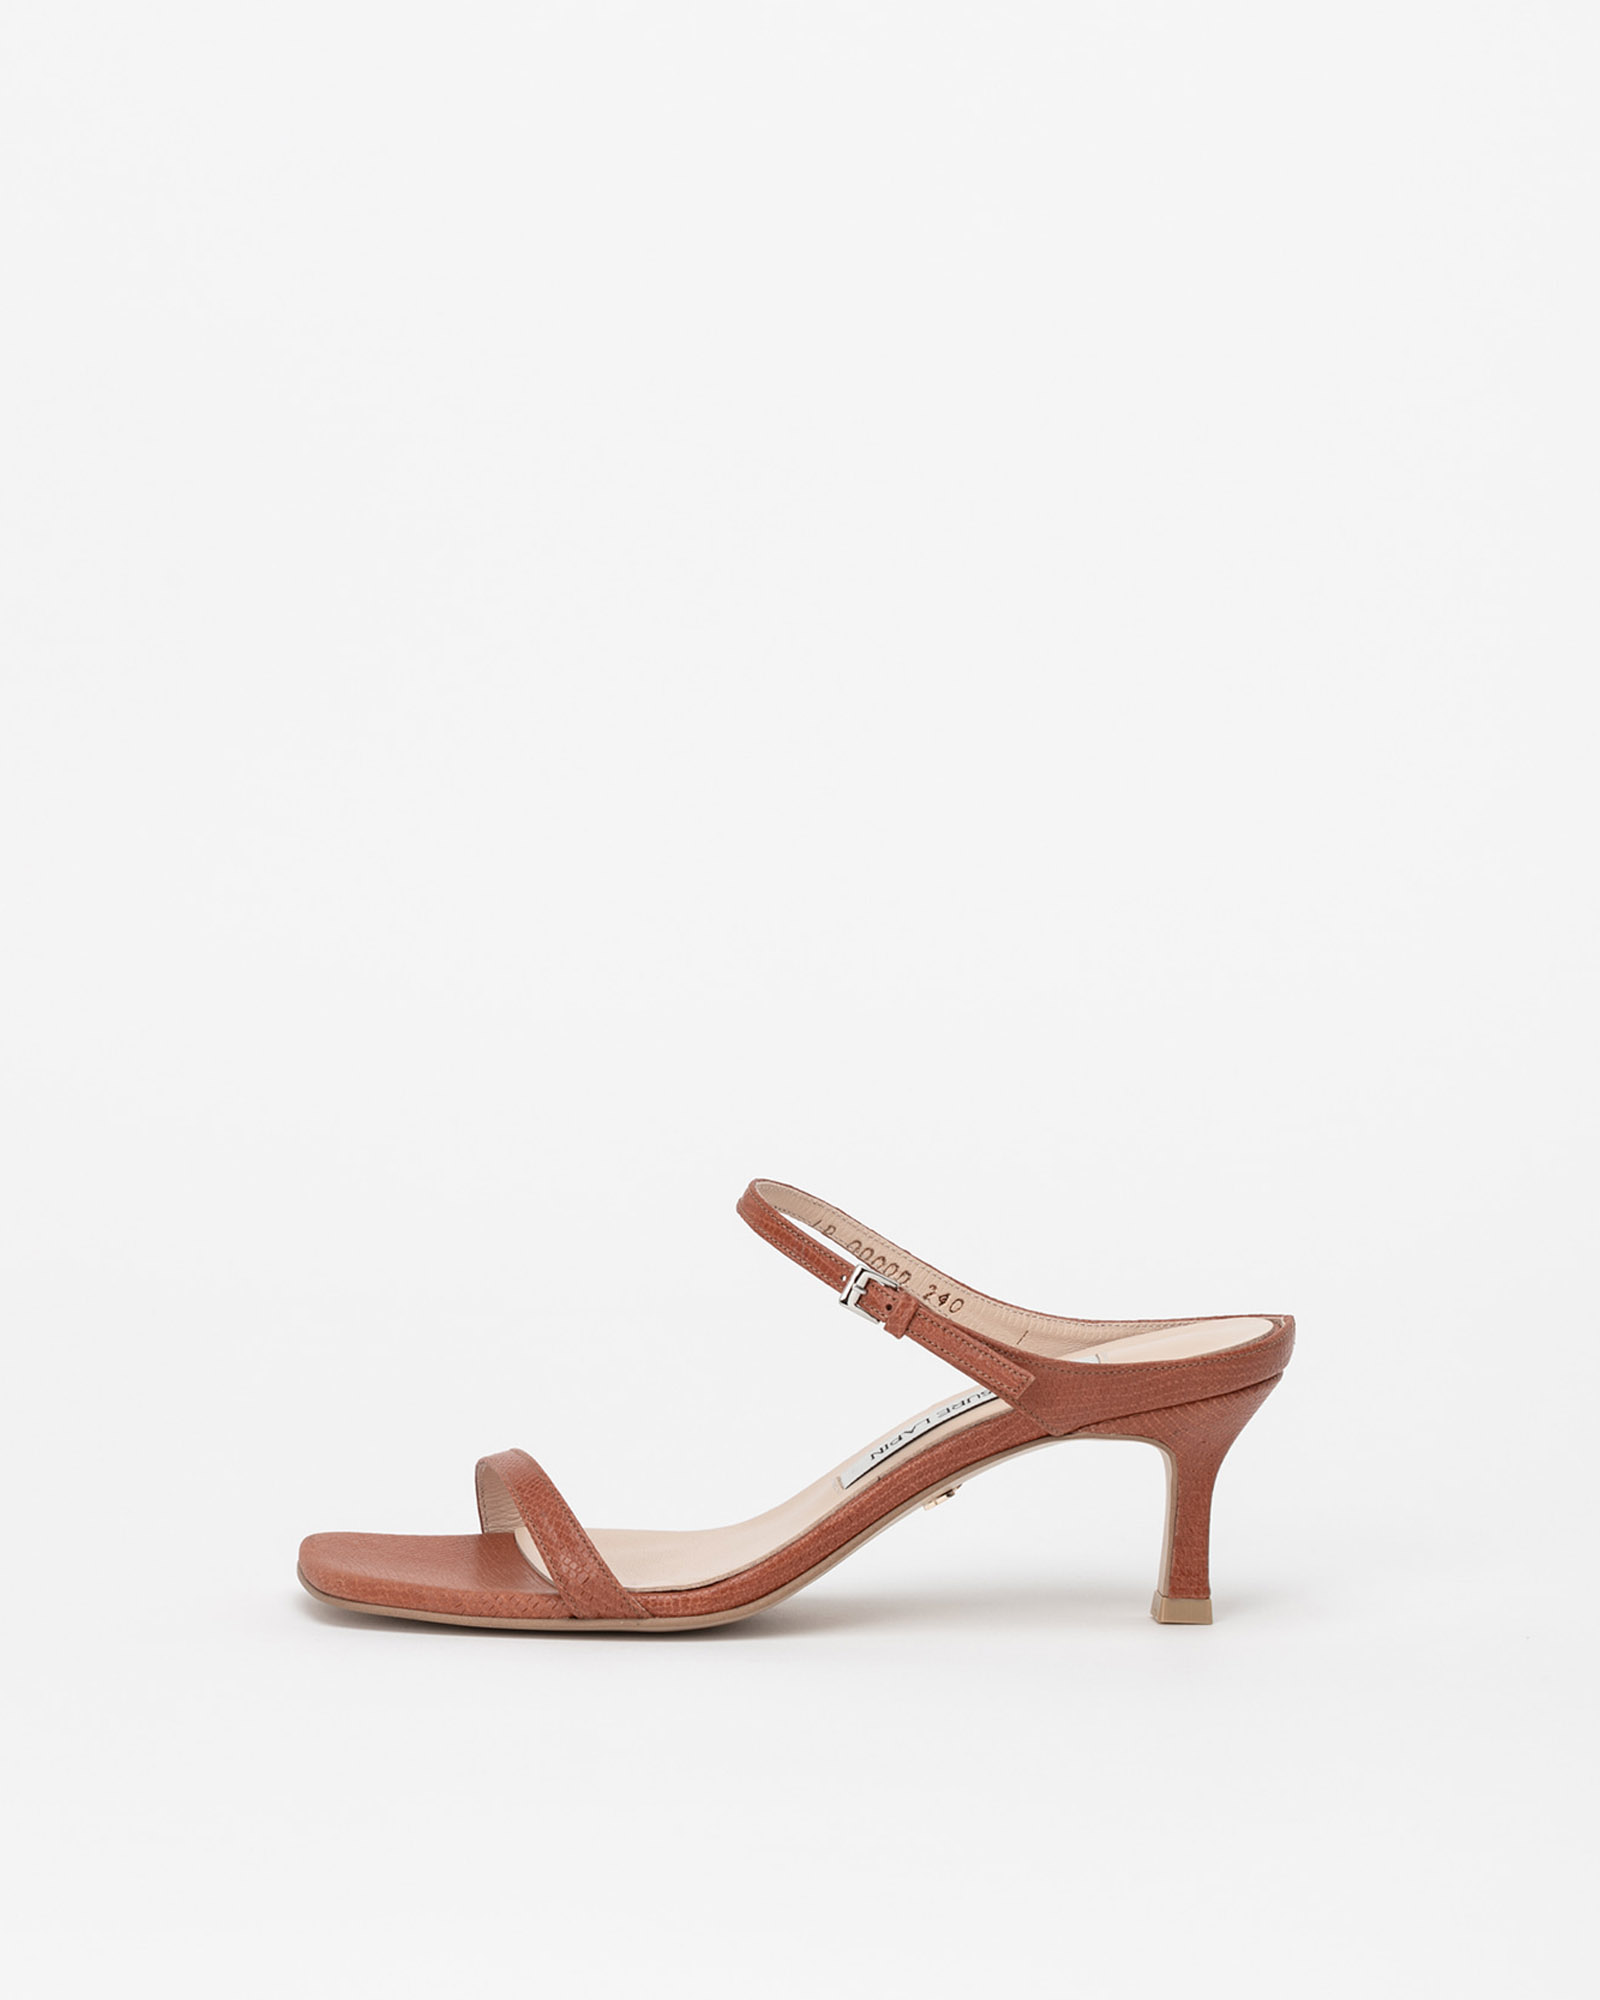 Sequire Buckled Strap Sandals